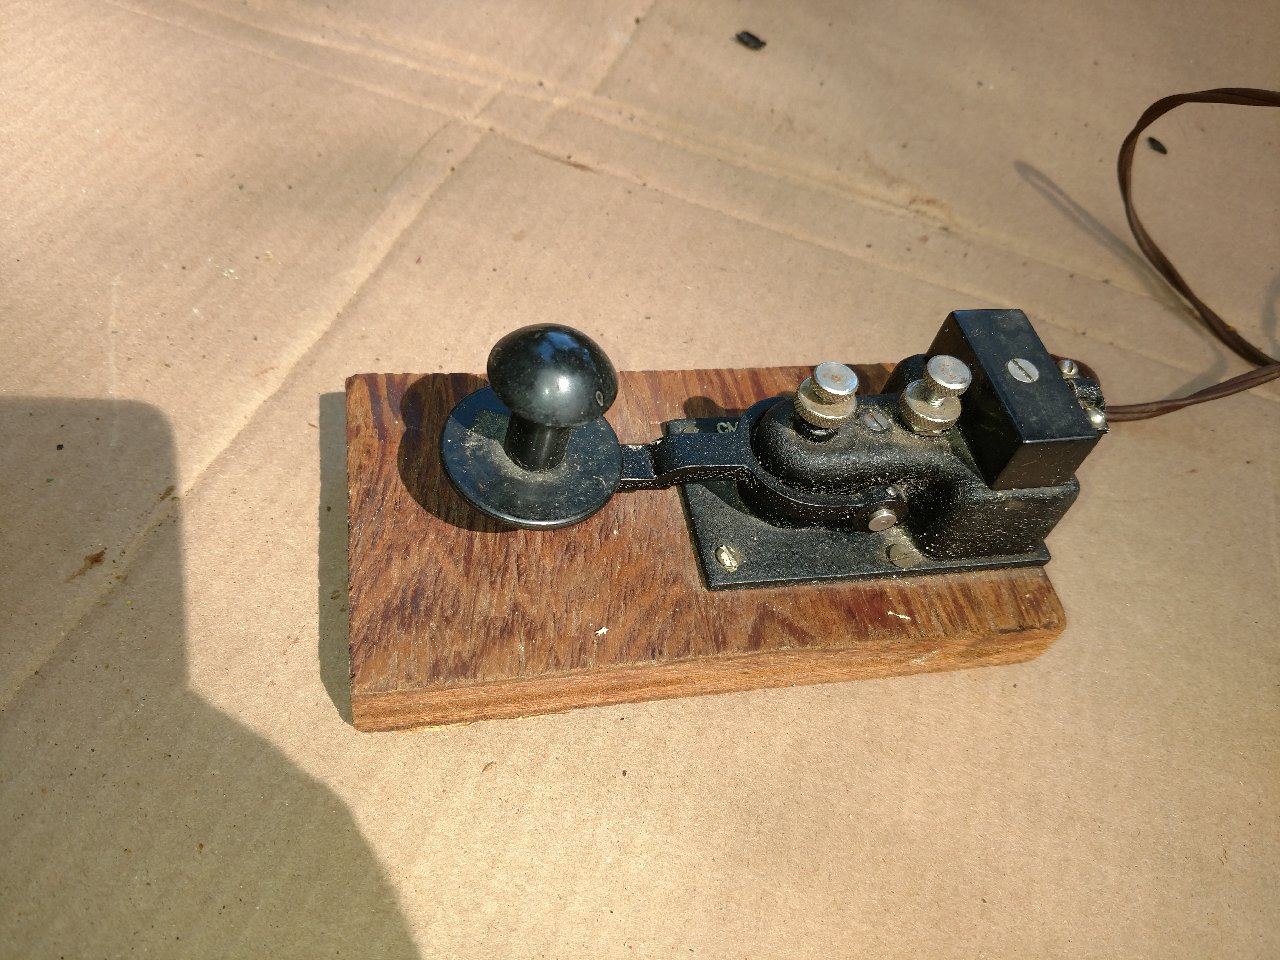 Telegraph Key - Used for my KN4MUS license2.jpg